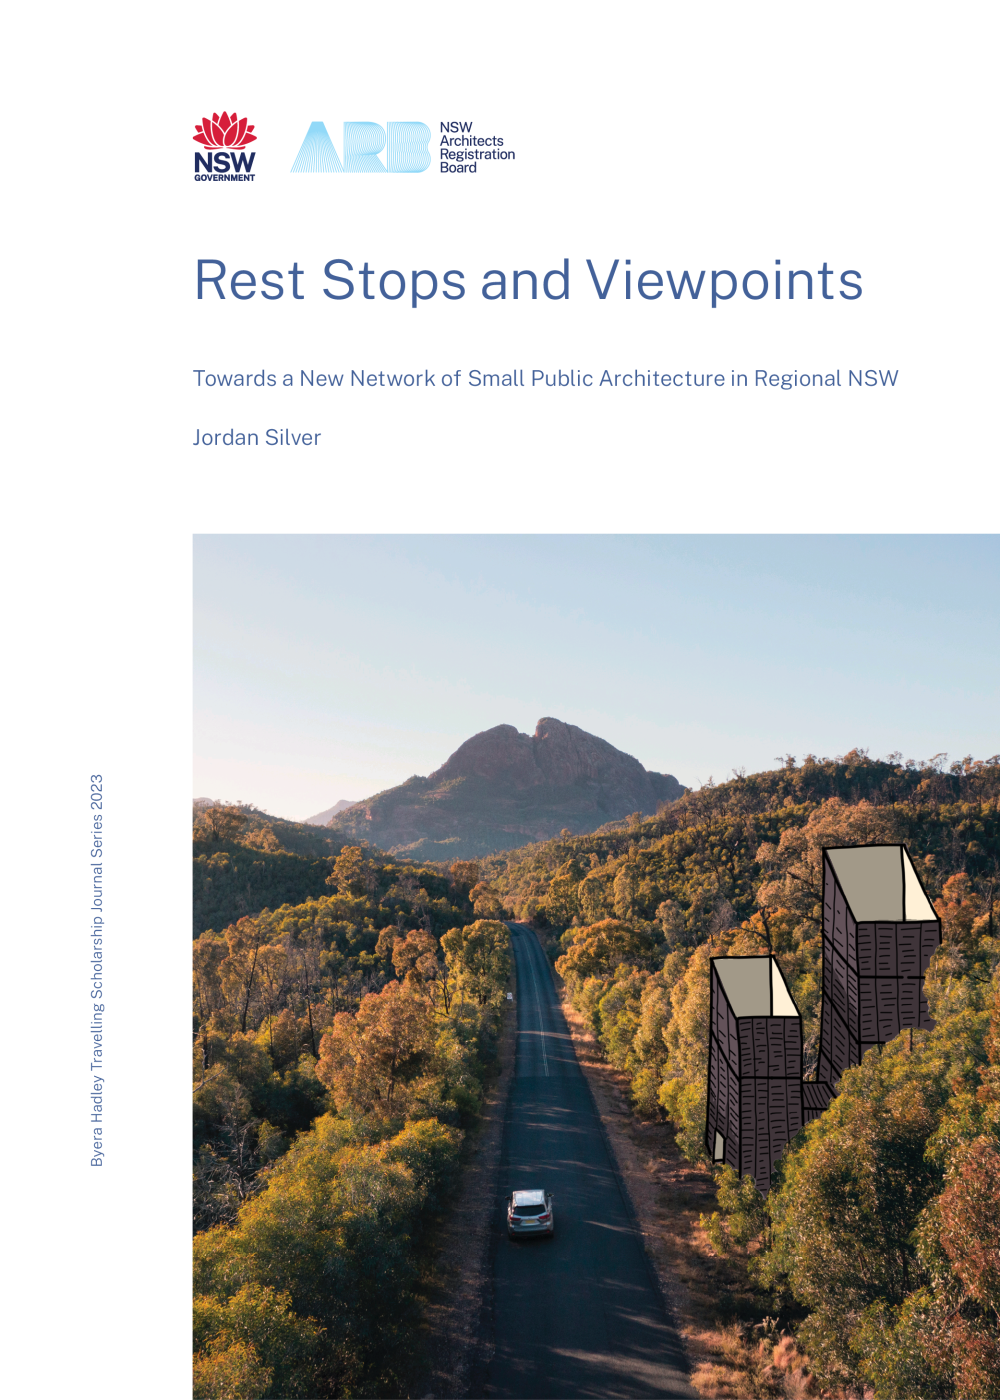 Rest Stops and Viewpoints